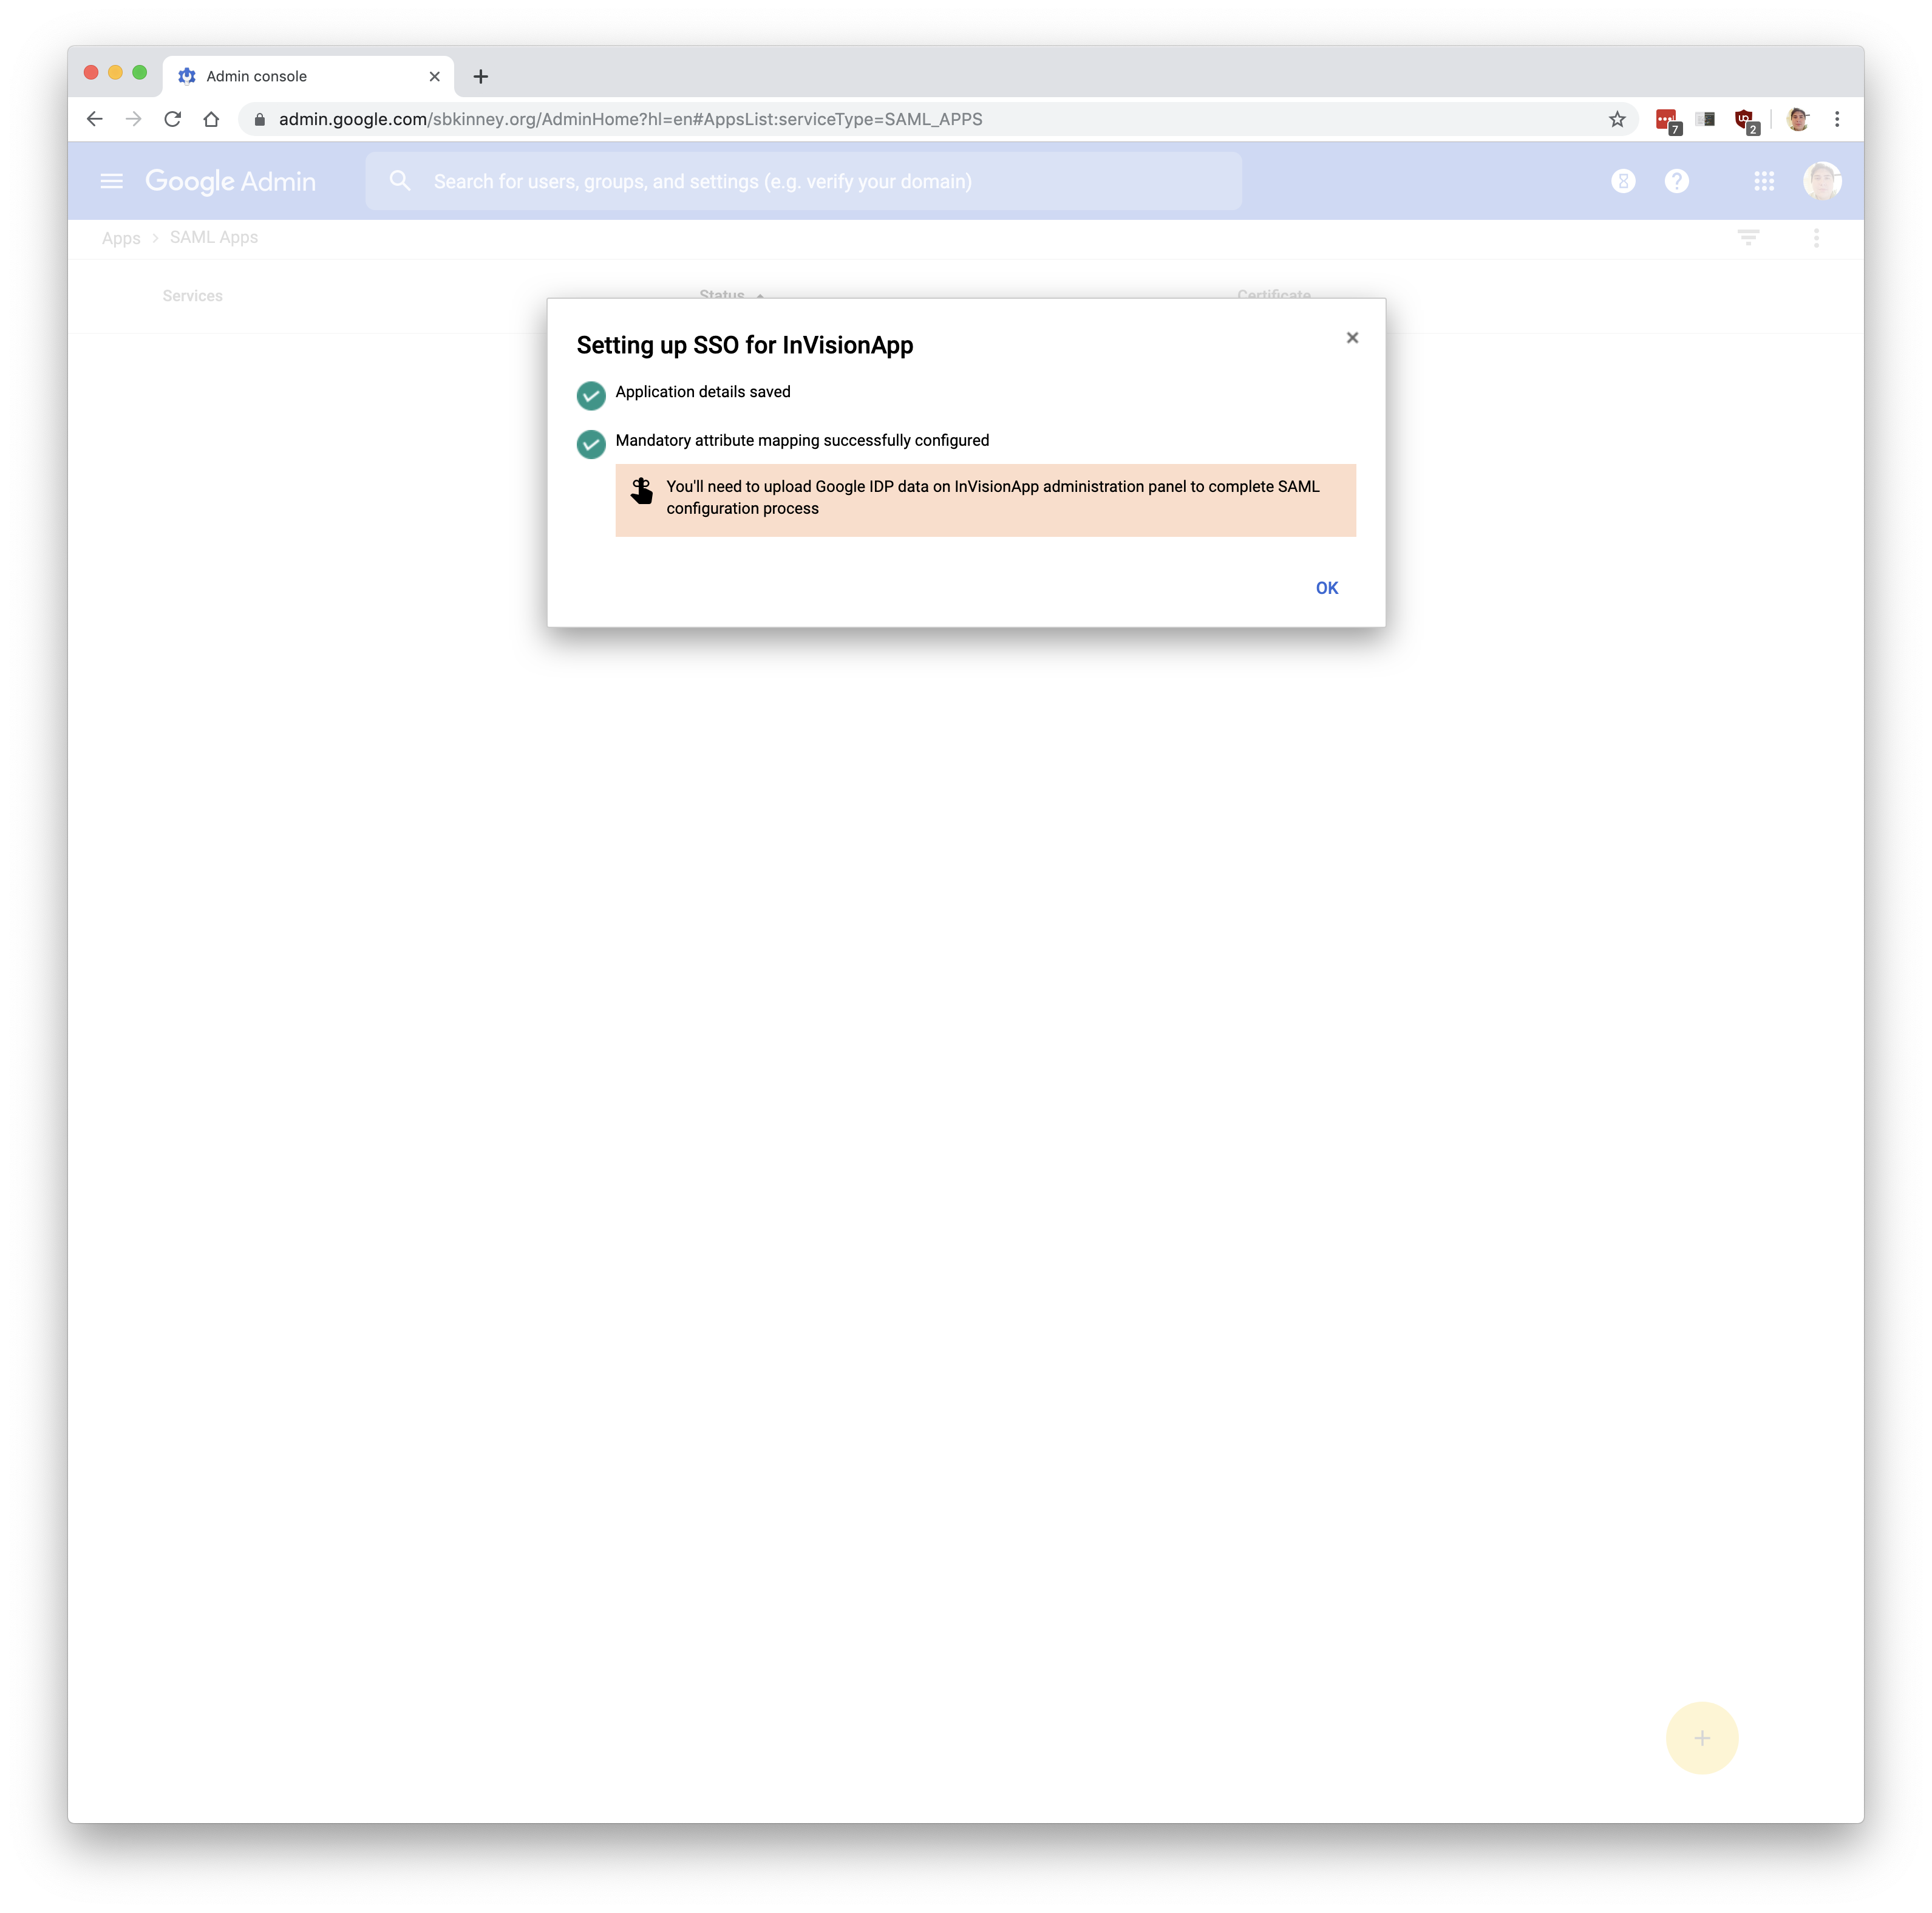 google-admin-console-setting-up-sso-for-invisionapp.png